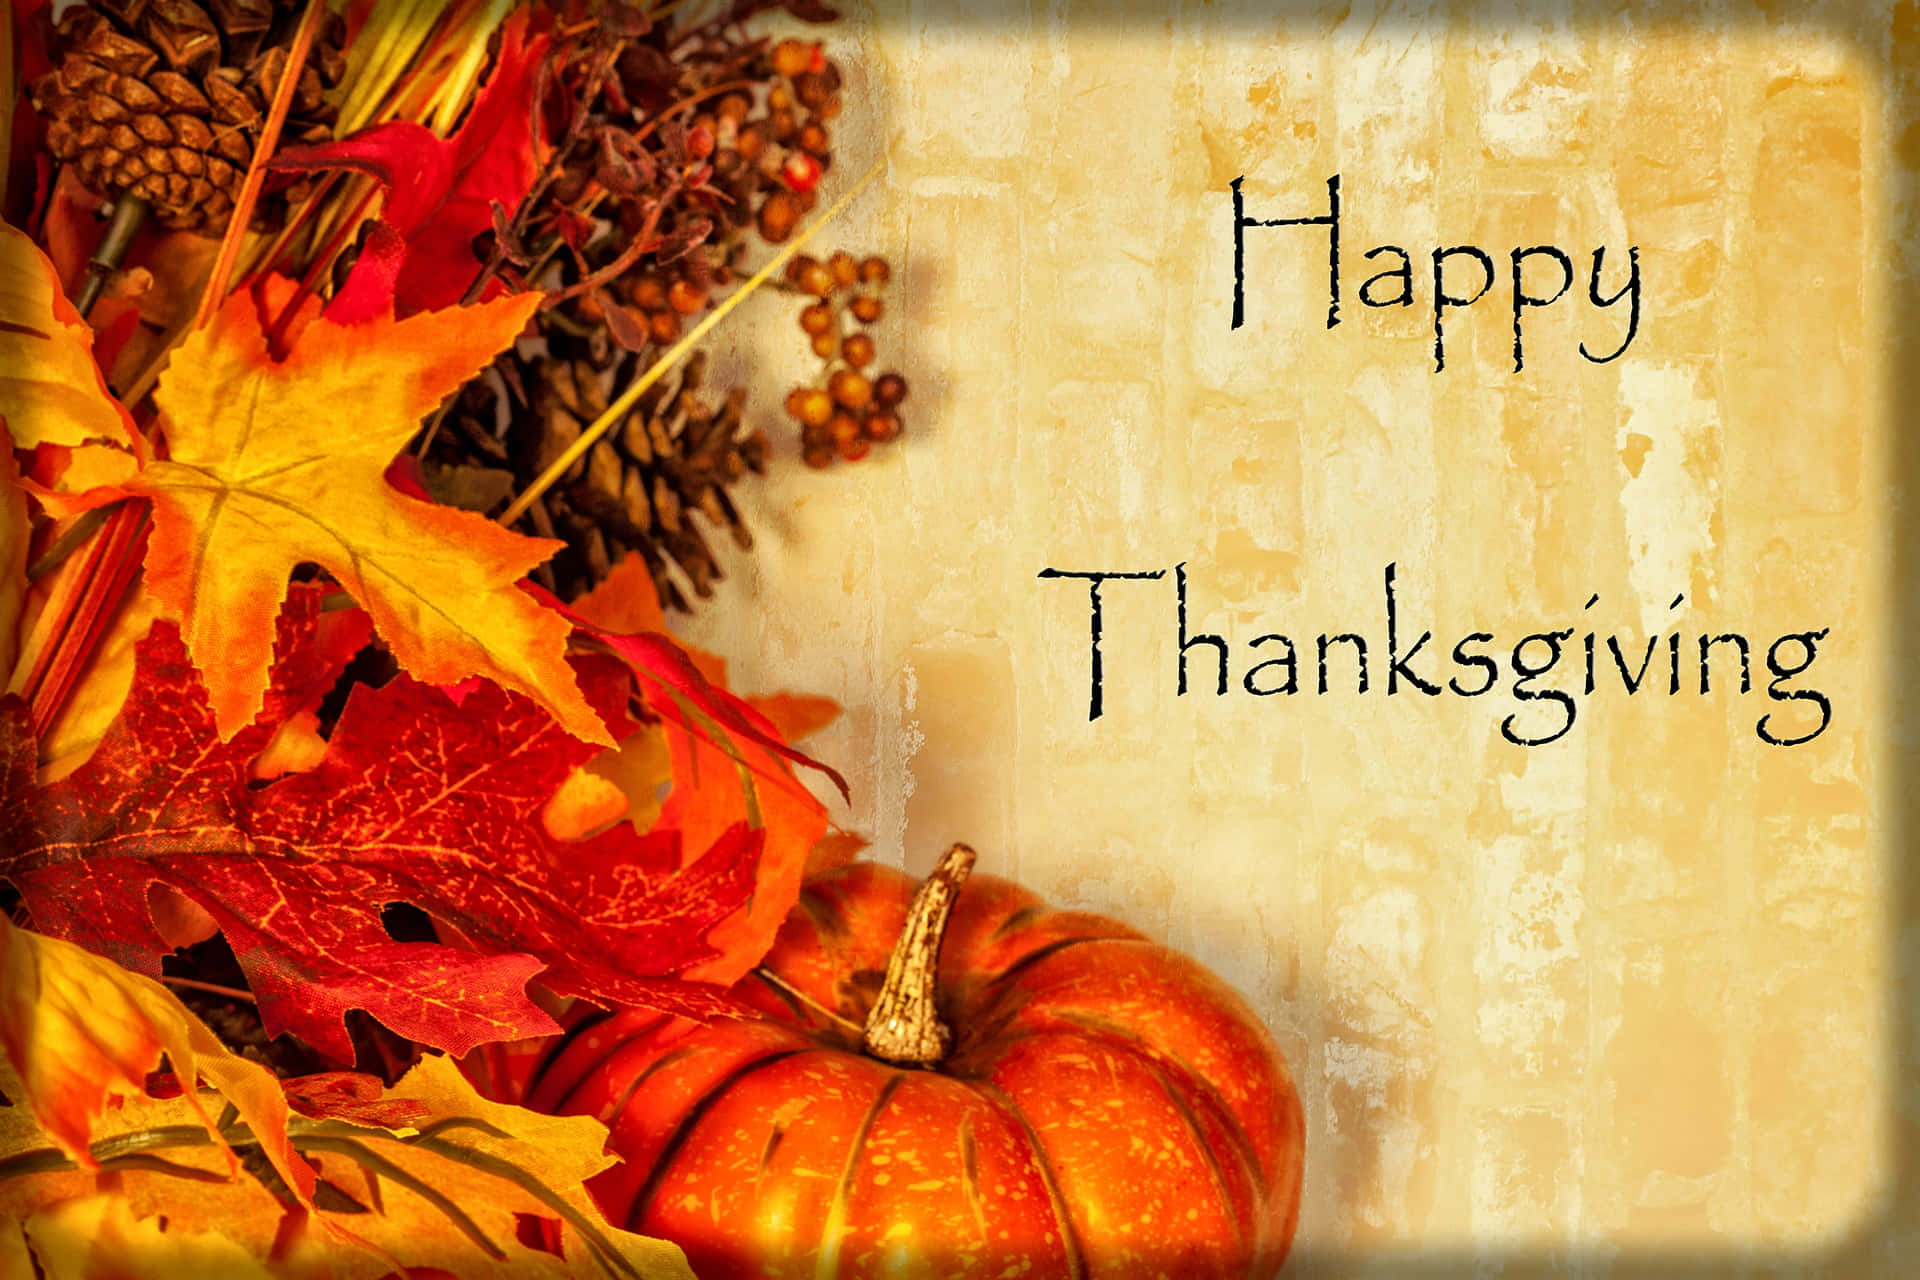 Download Beautiful Thanksgiving Pictures 5616 X 3744 | Wallpapers.com